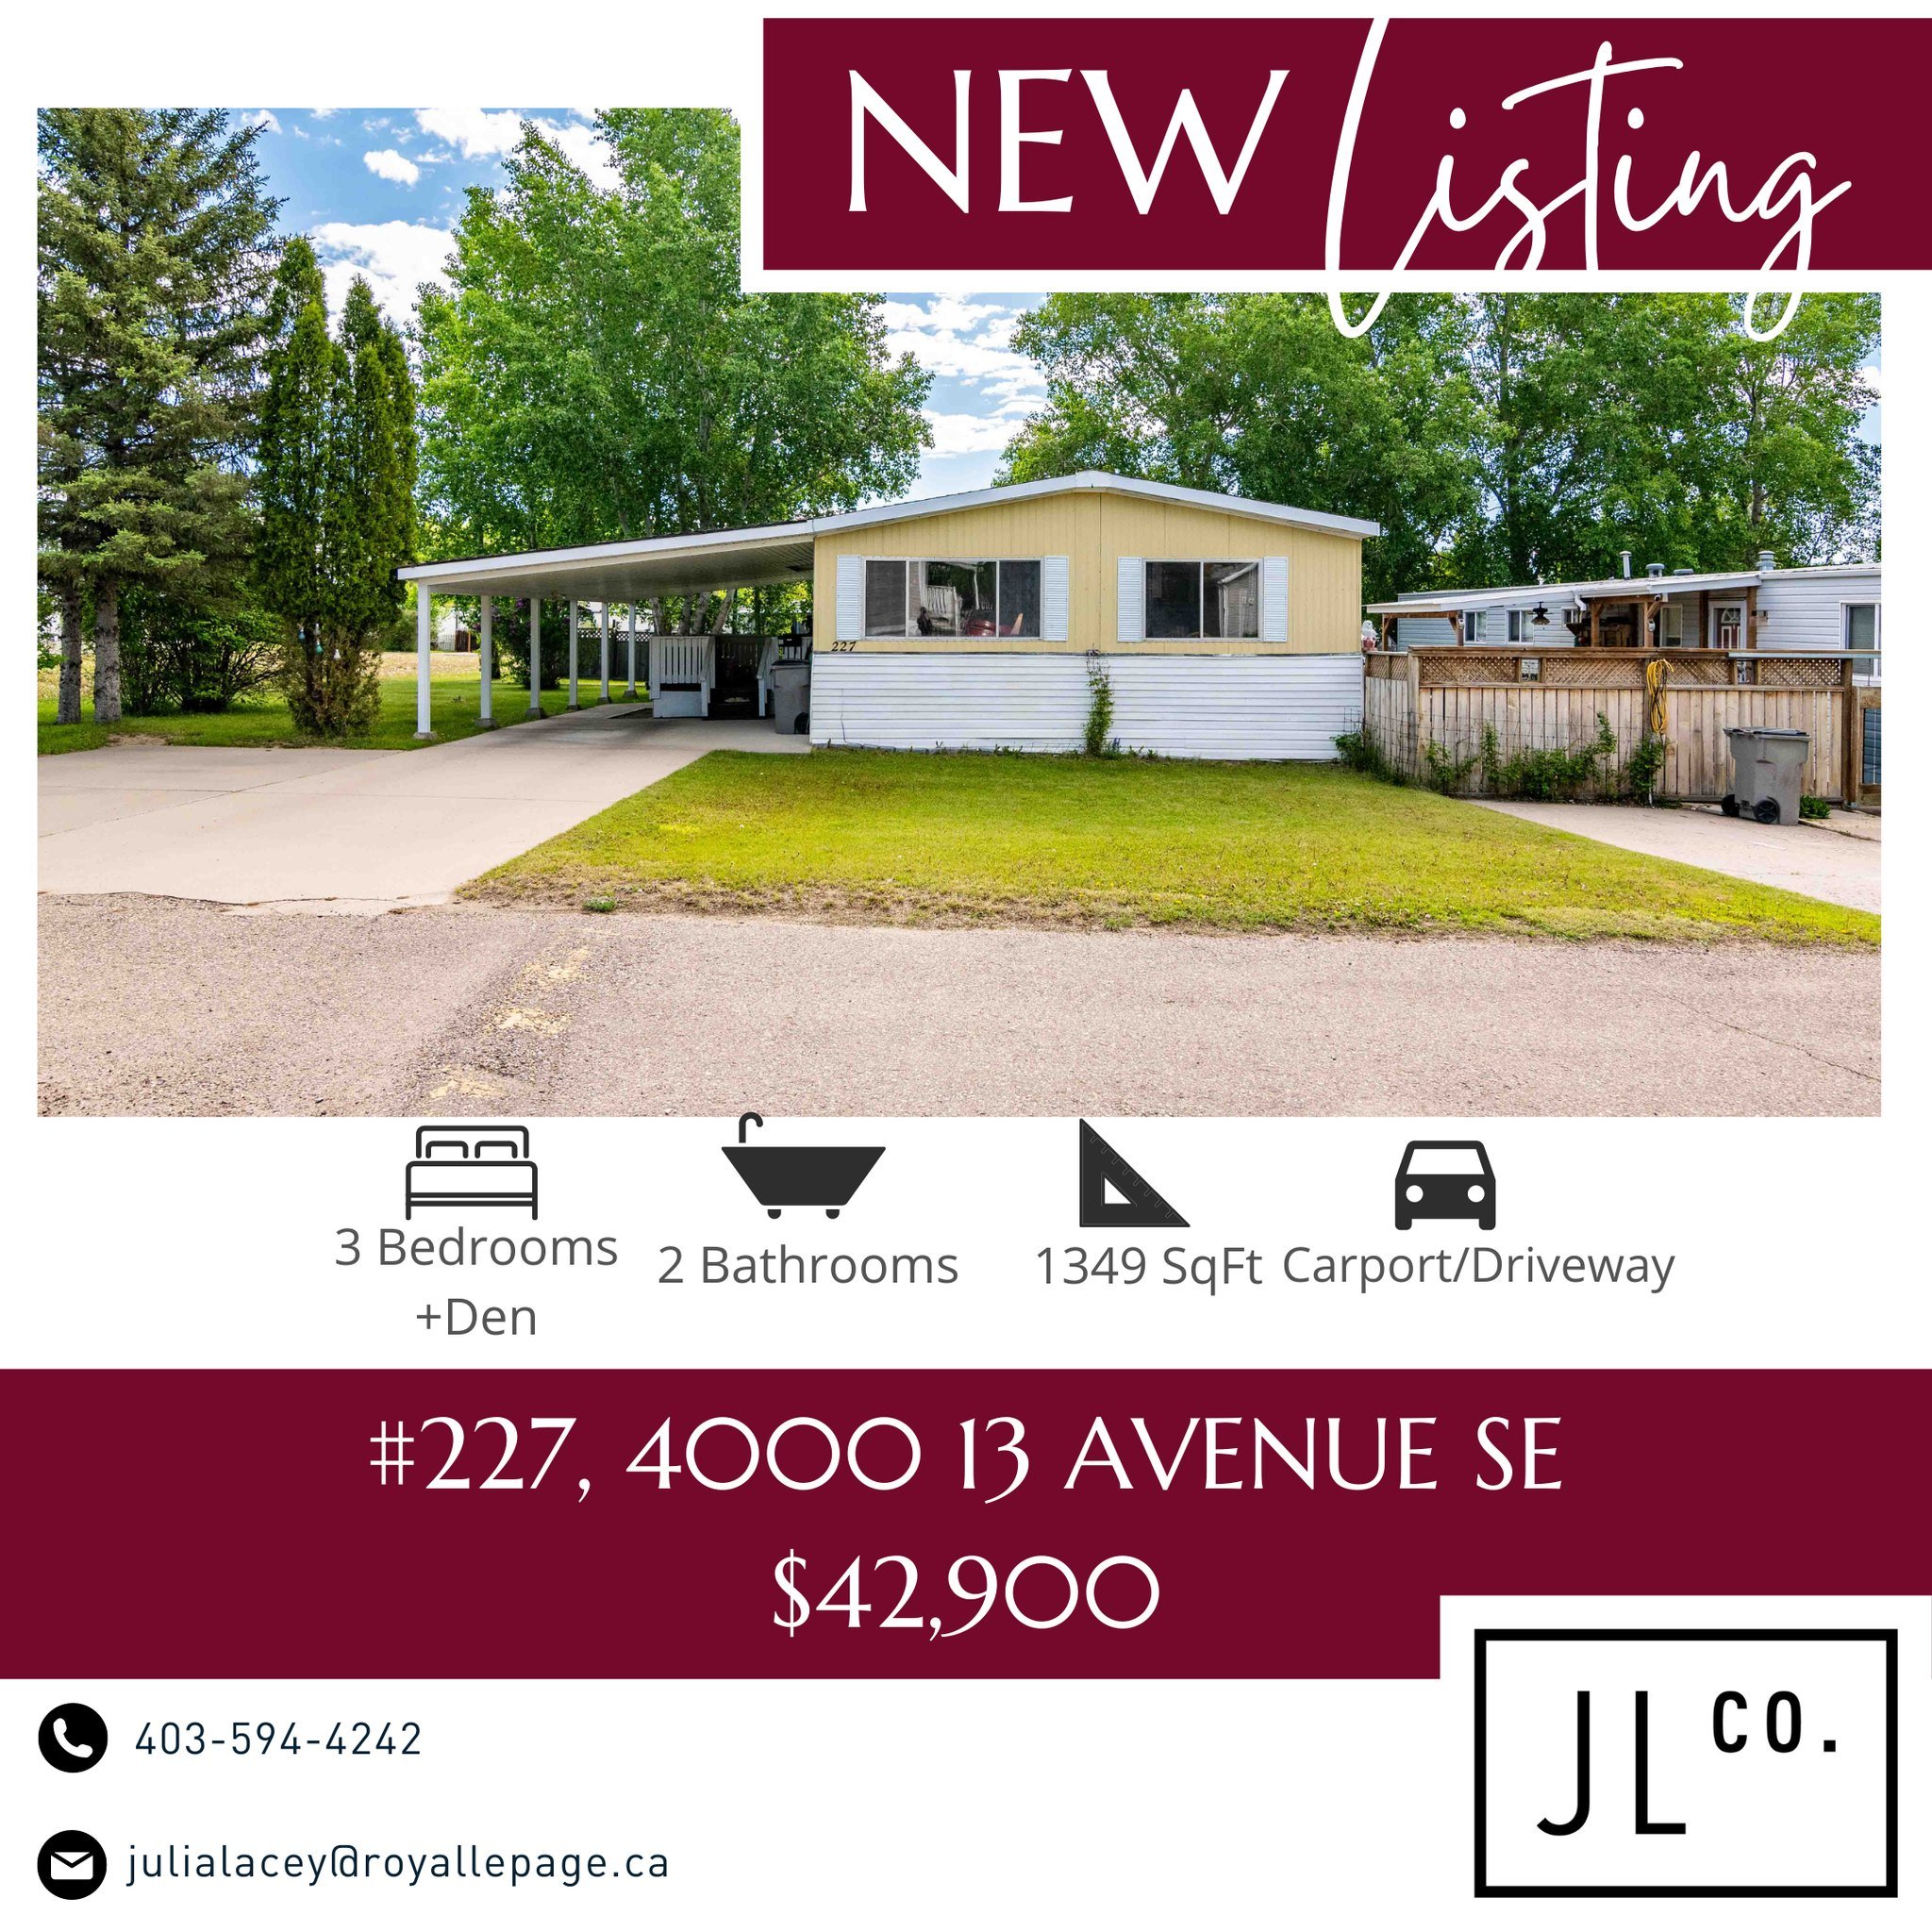 Welcome to an affordable 1349 SqFt. double wide mobile home in Medicine Hat Village. Nestled in a quiet neighborhood, this home boasts a park-like lot adorned with numerous mature trees and is conveniently located adjacent to a playground and basketb